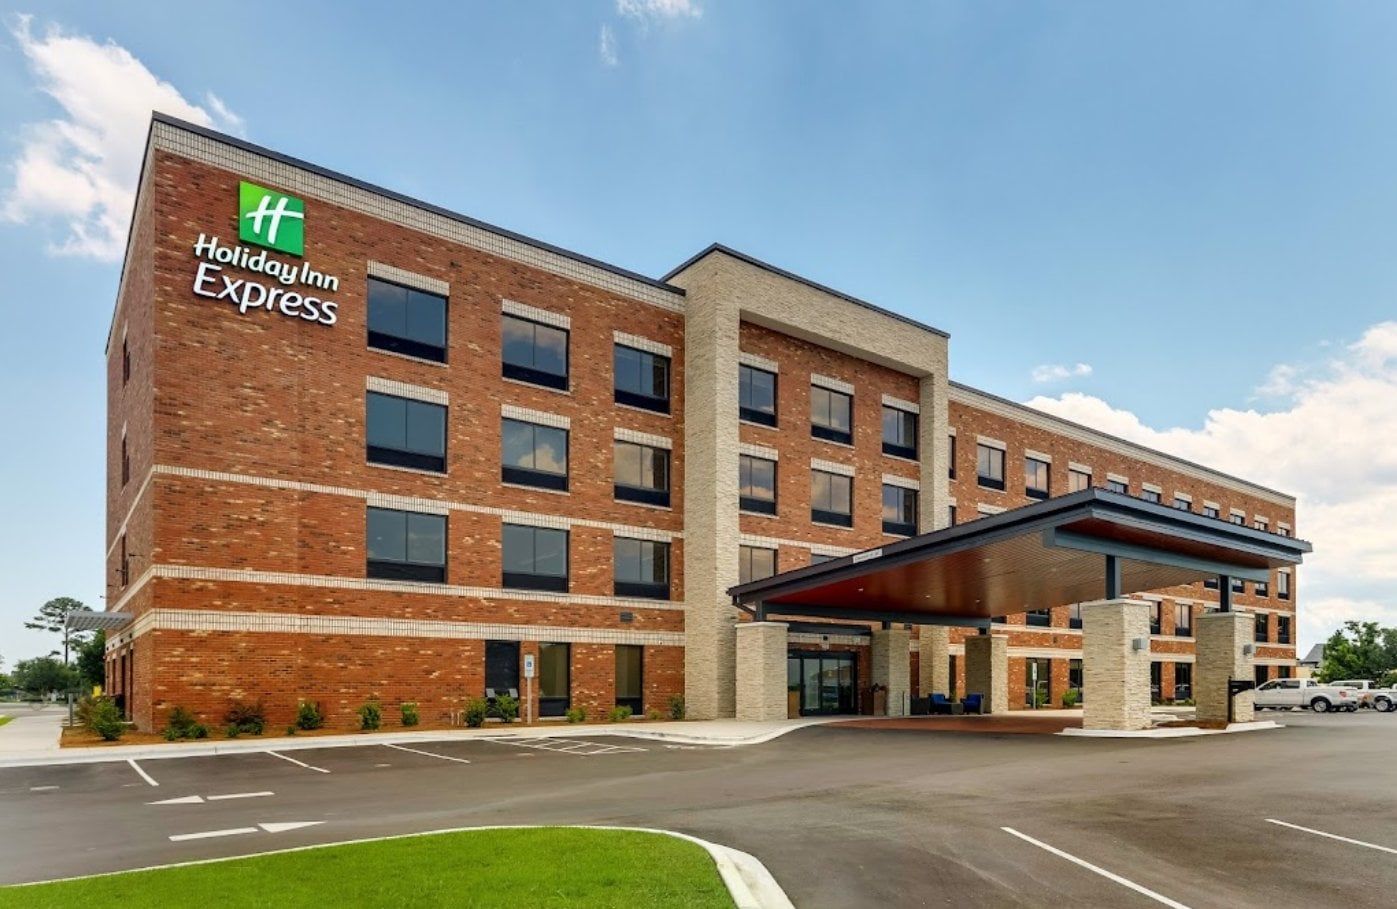 Holiday Inn Express – Porters Neck, Wilmington, NC